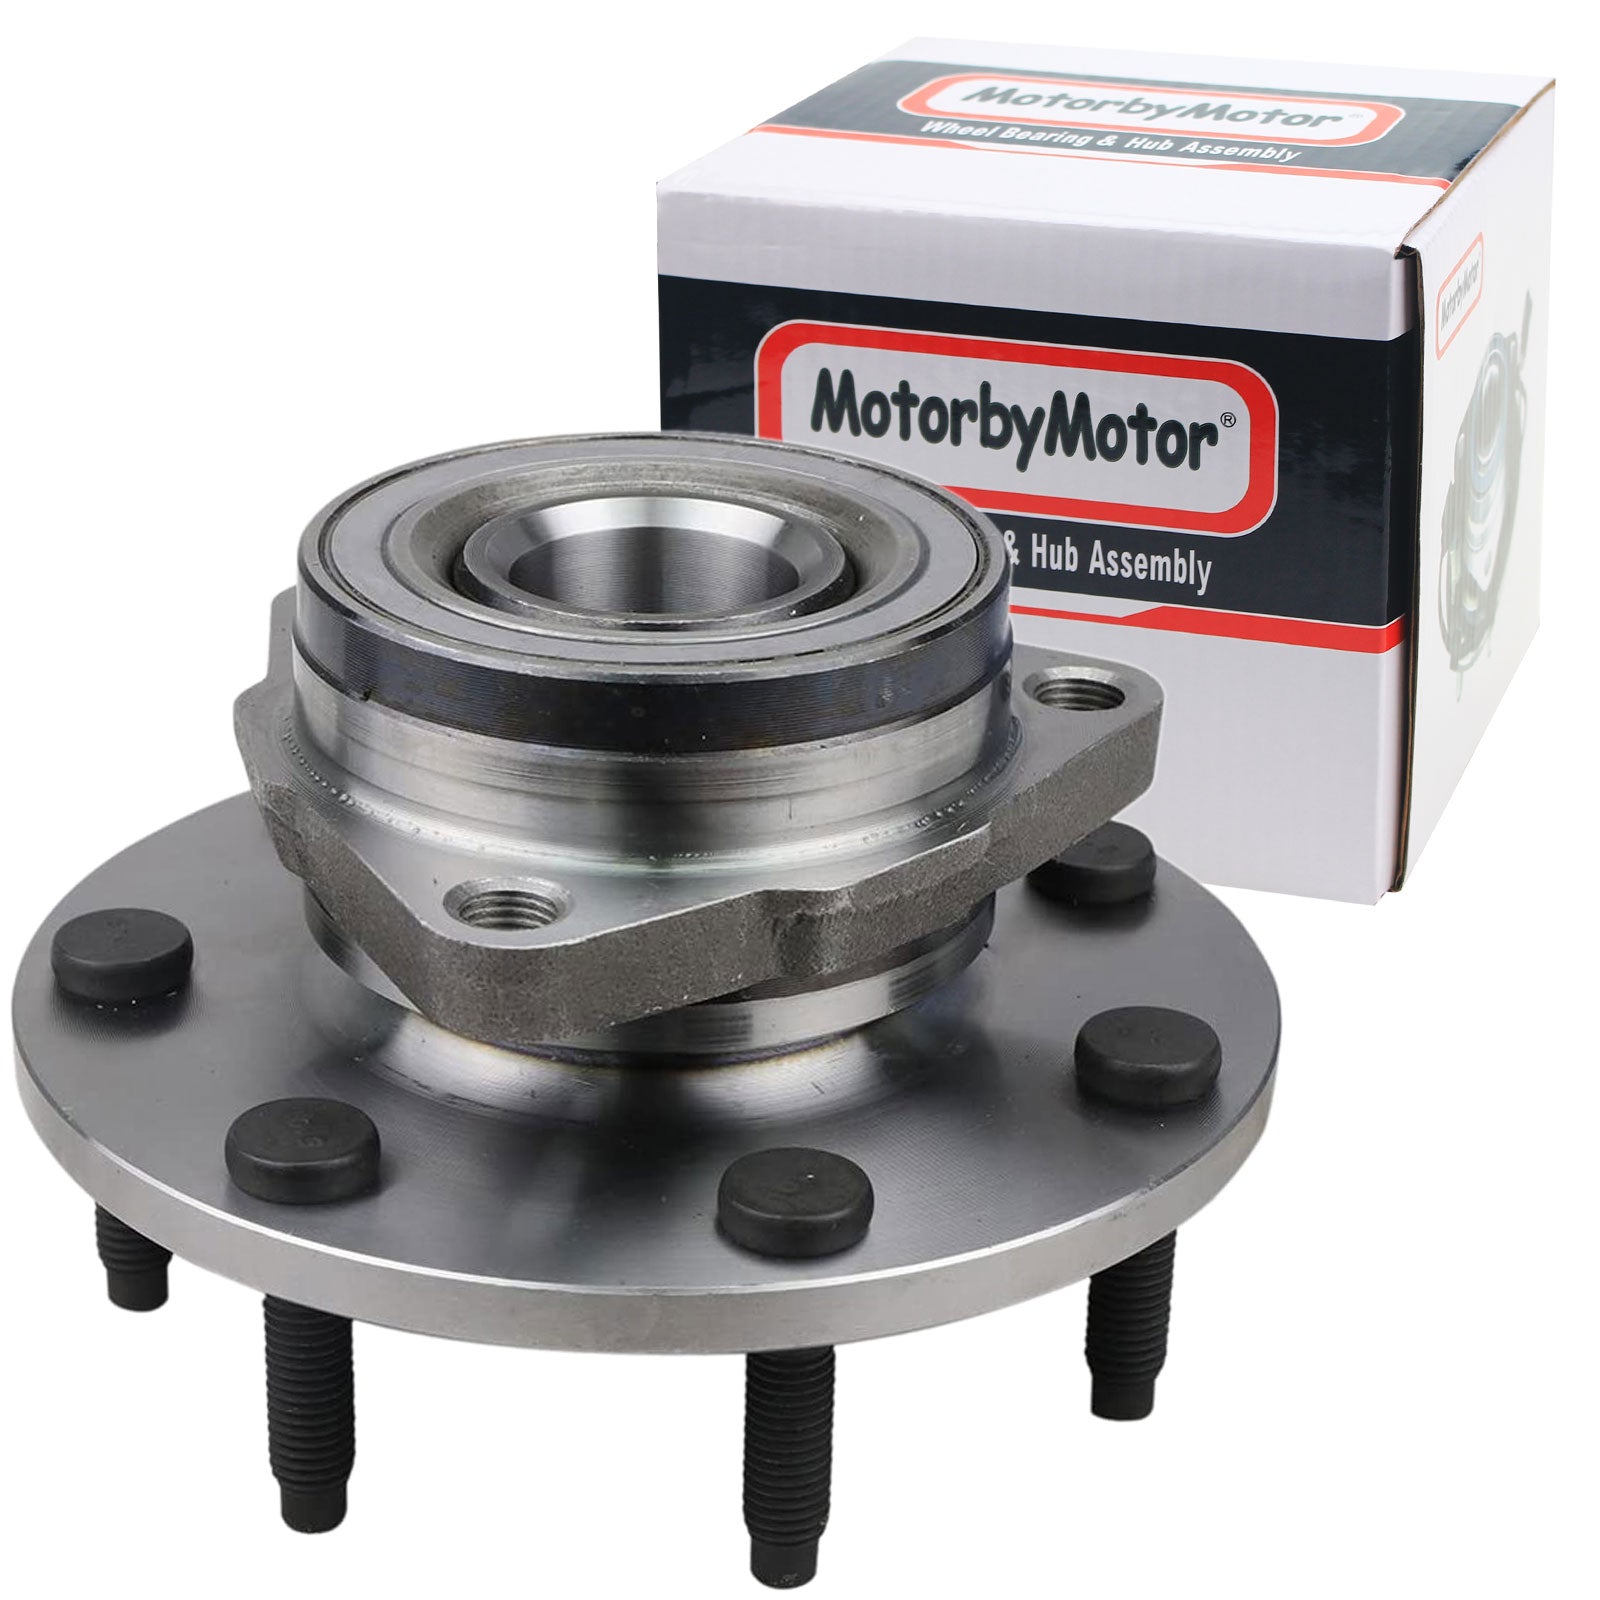 MotorbyMotor 515022 Front Wheel Bearing and Hub Assembly 4WD with 7 Lugs Fits for Ford F-150 2000, Ford F-250 1997 thru 1999 Low-Runout OE Directly Replacement Hub Bearing (2-Wheel ABS) MotorbyMotor